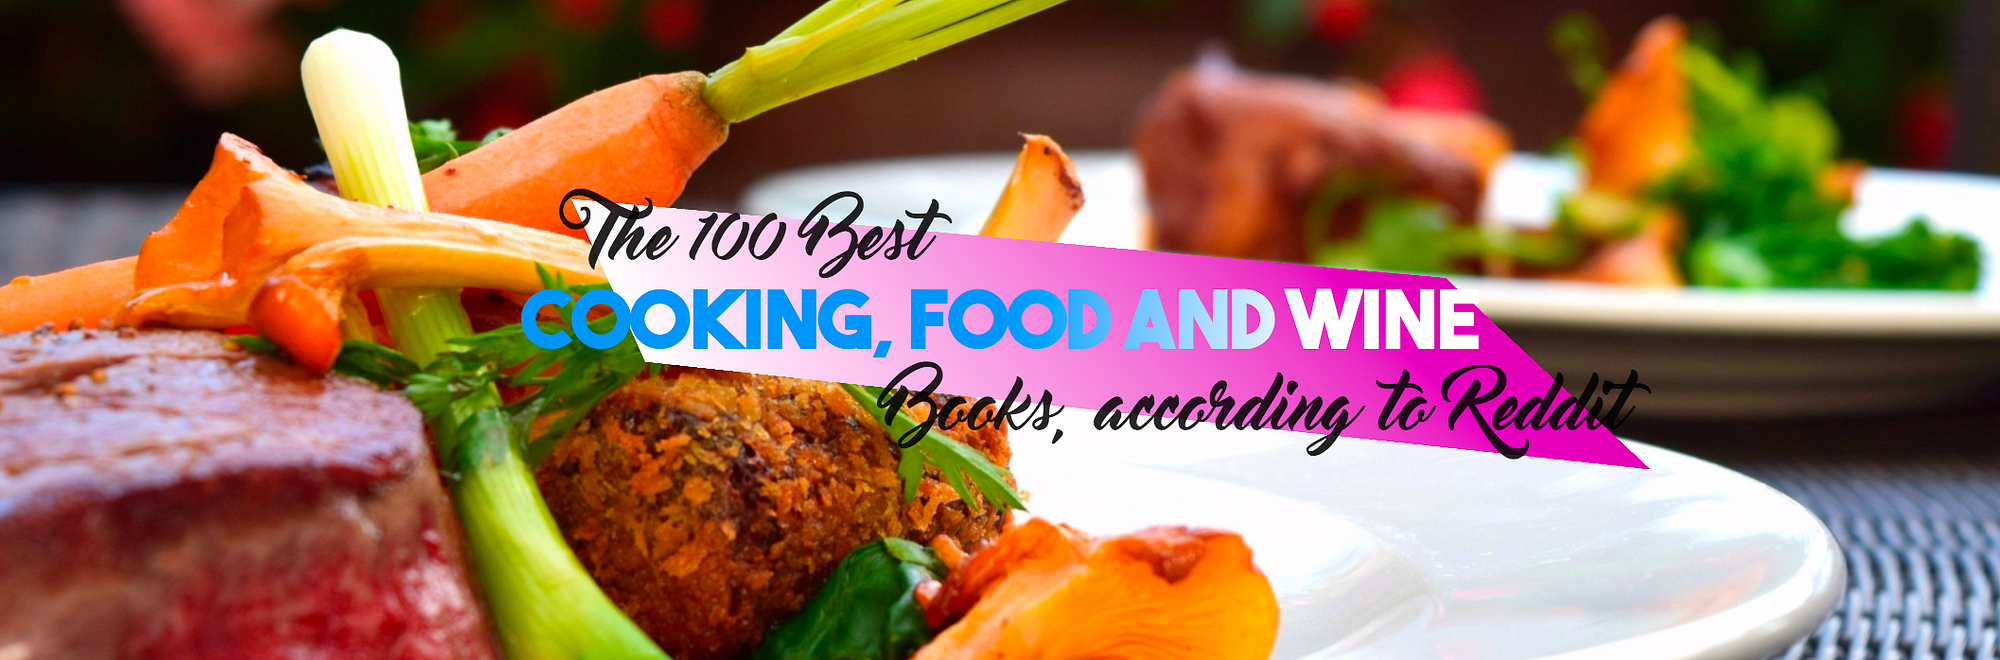 The 100 Best Cooking Food And Wine Books According To Reddit with healthy foods to eat reddit regarding Residence